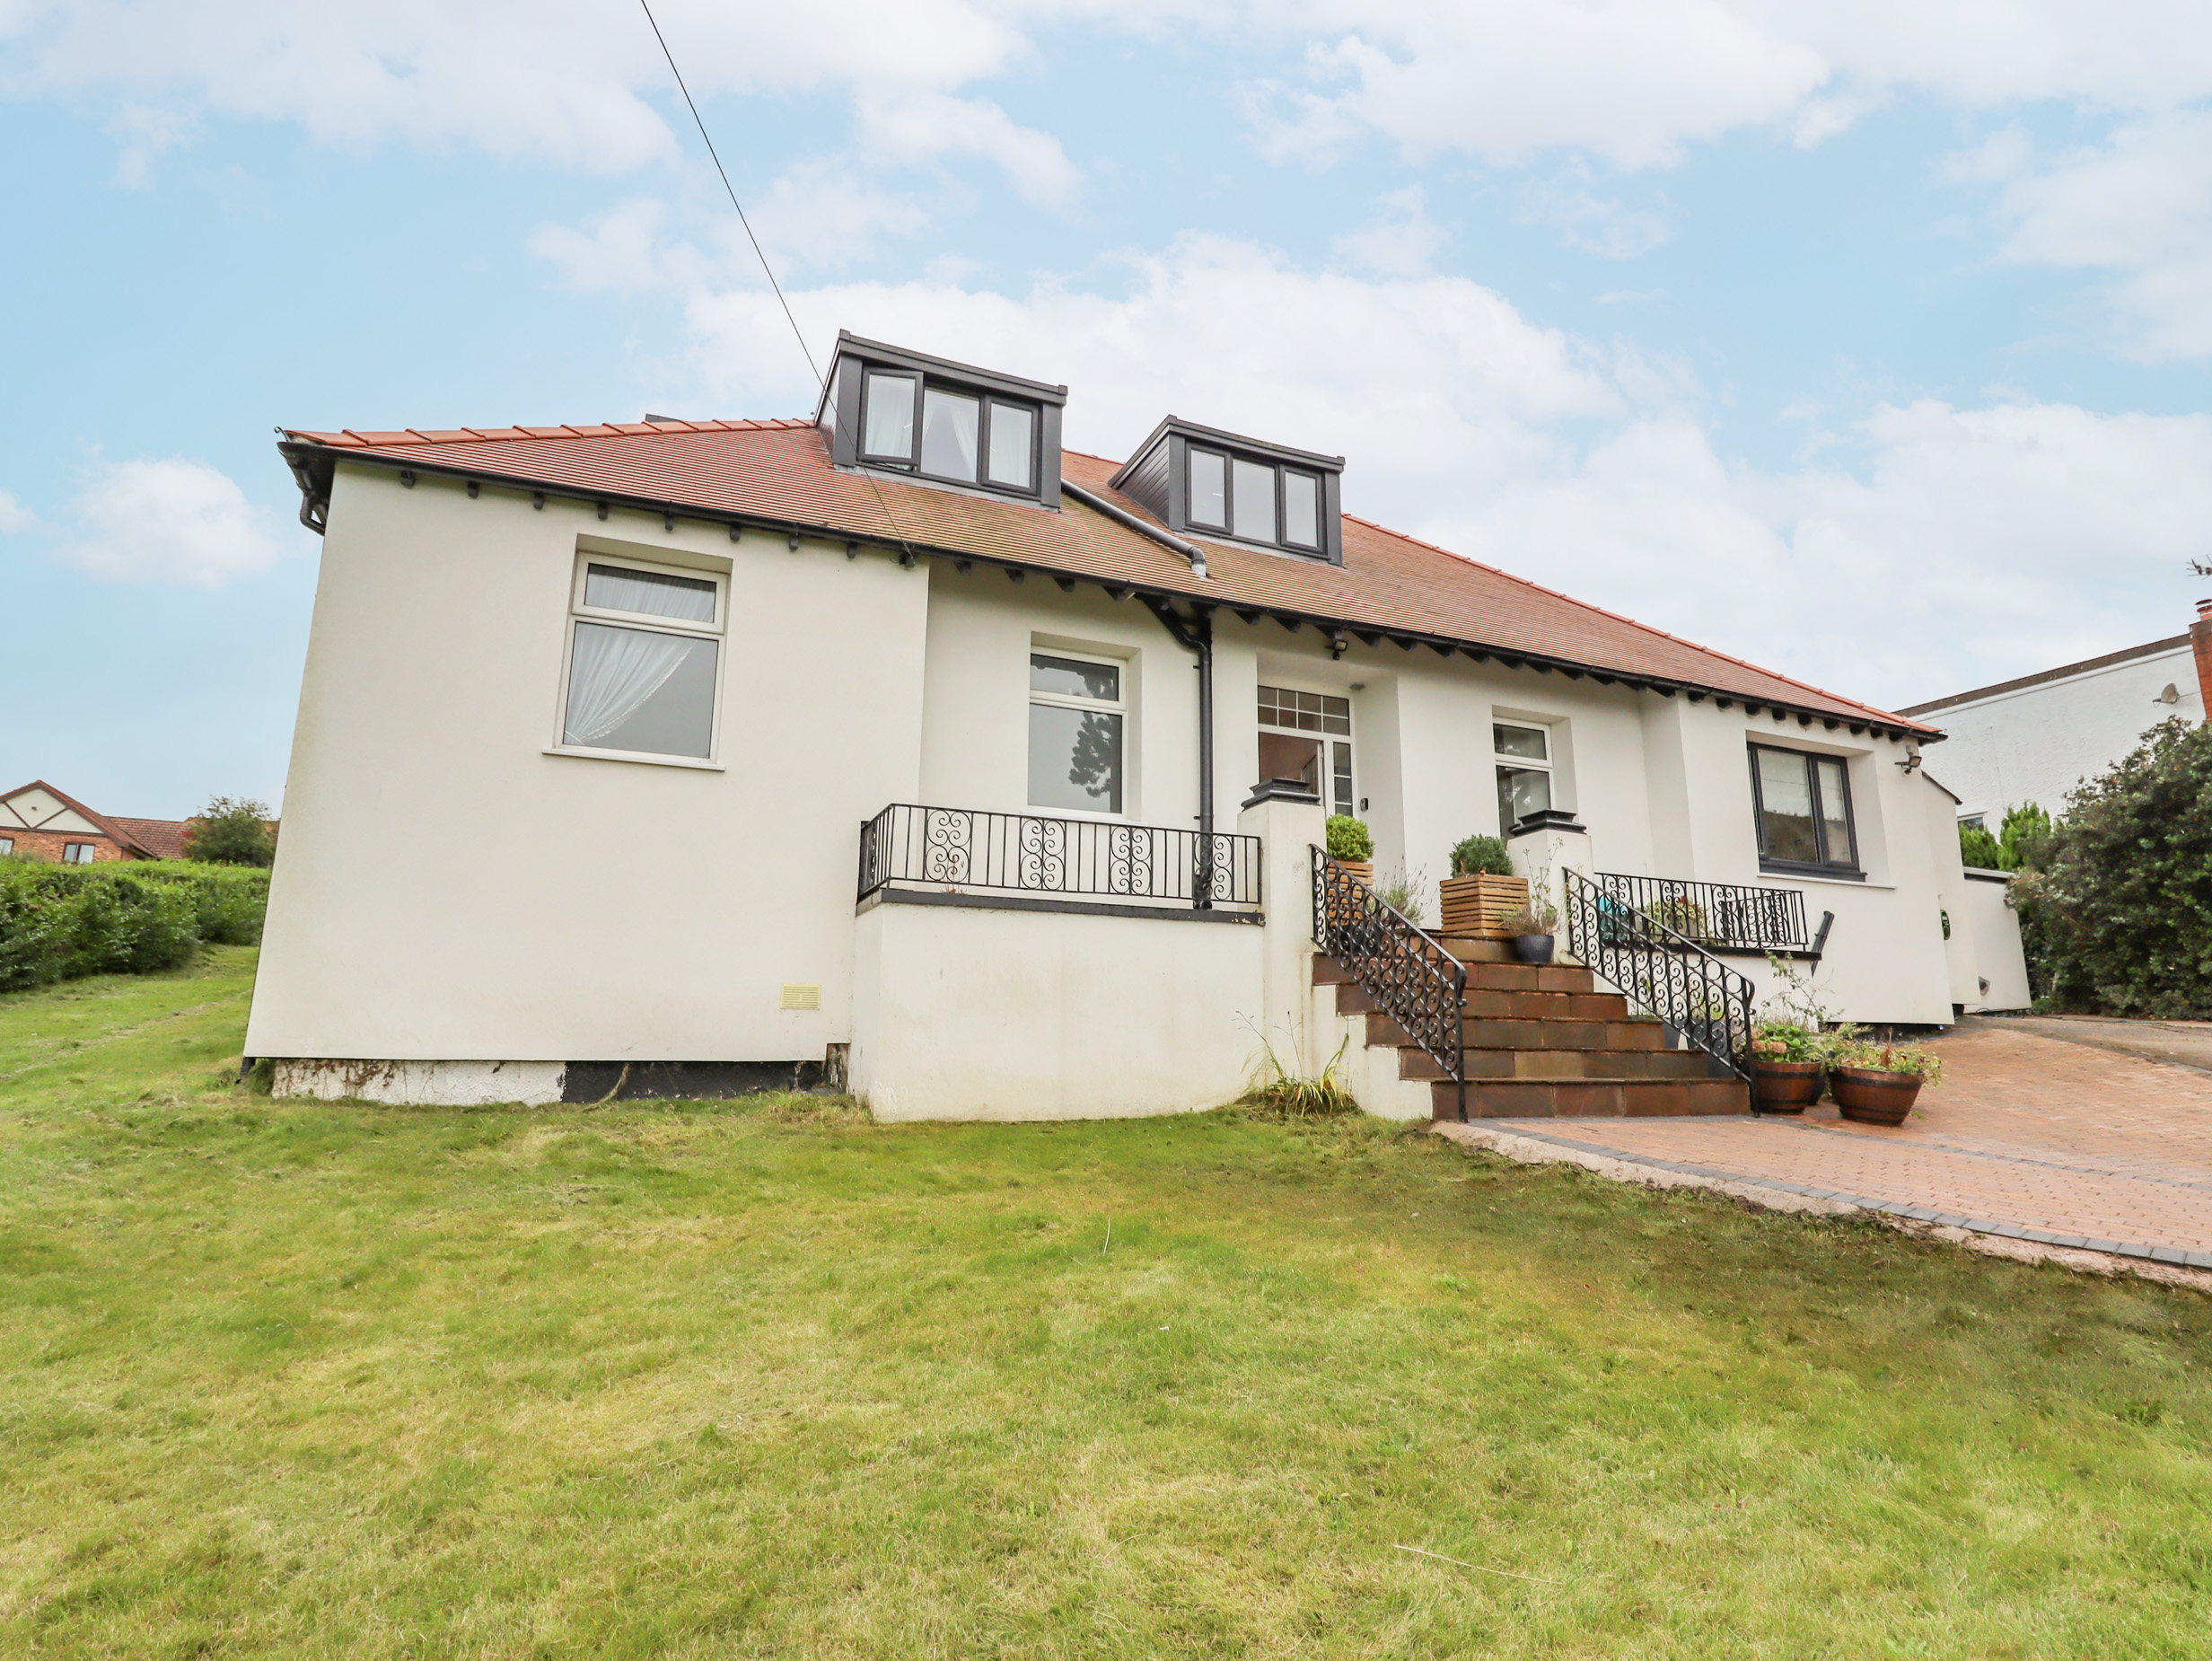 4 bedroom Cottage for rent in Colwyn Bay